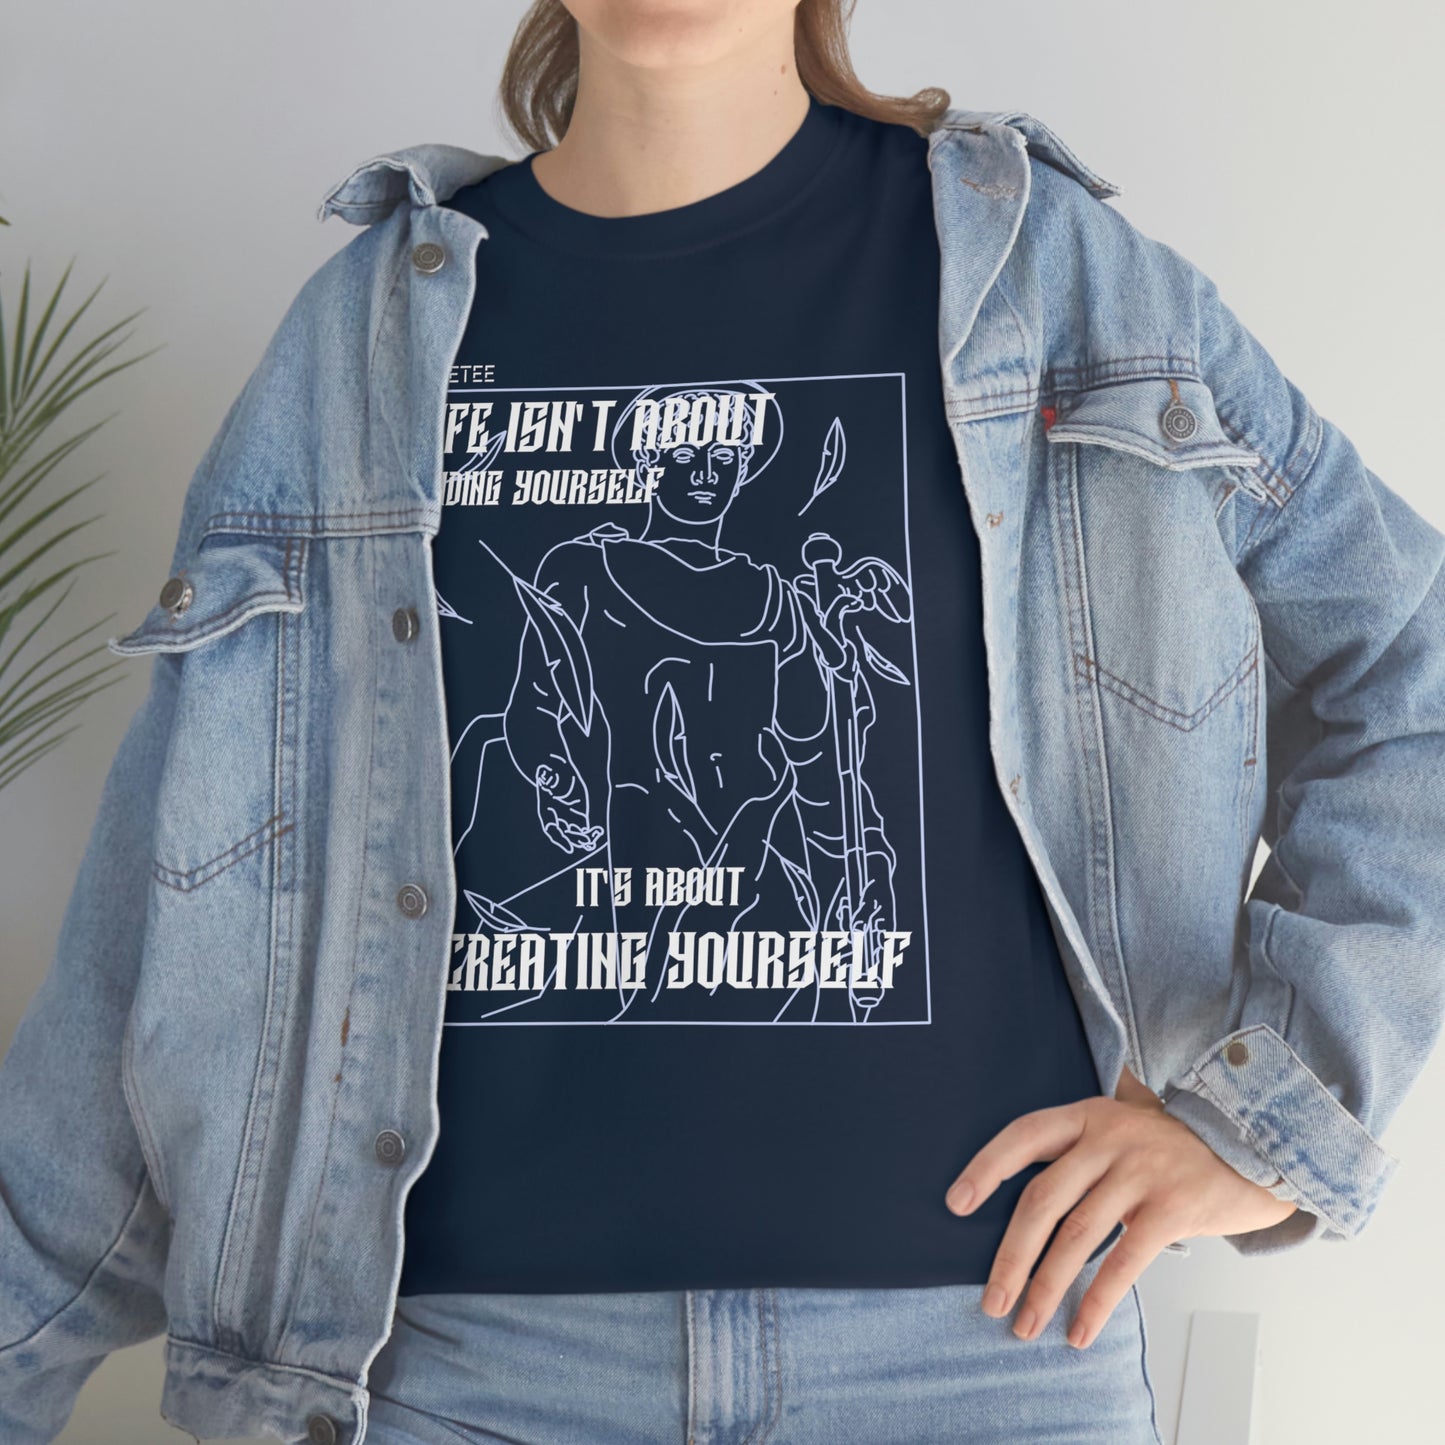 Creating Yourself T-Shirt